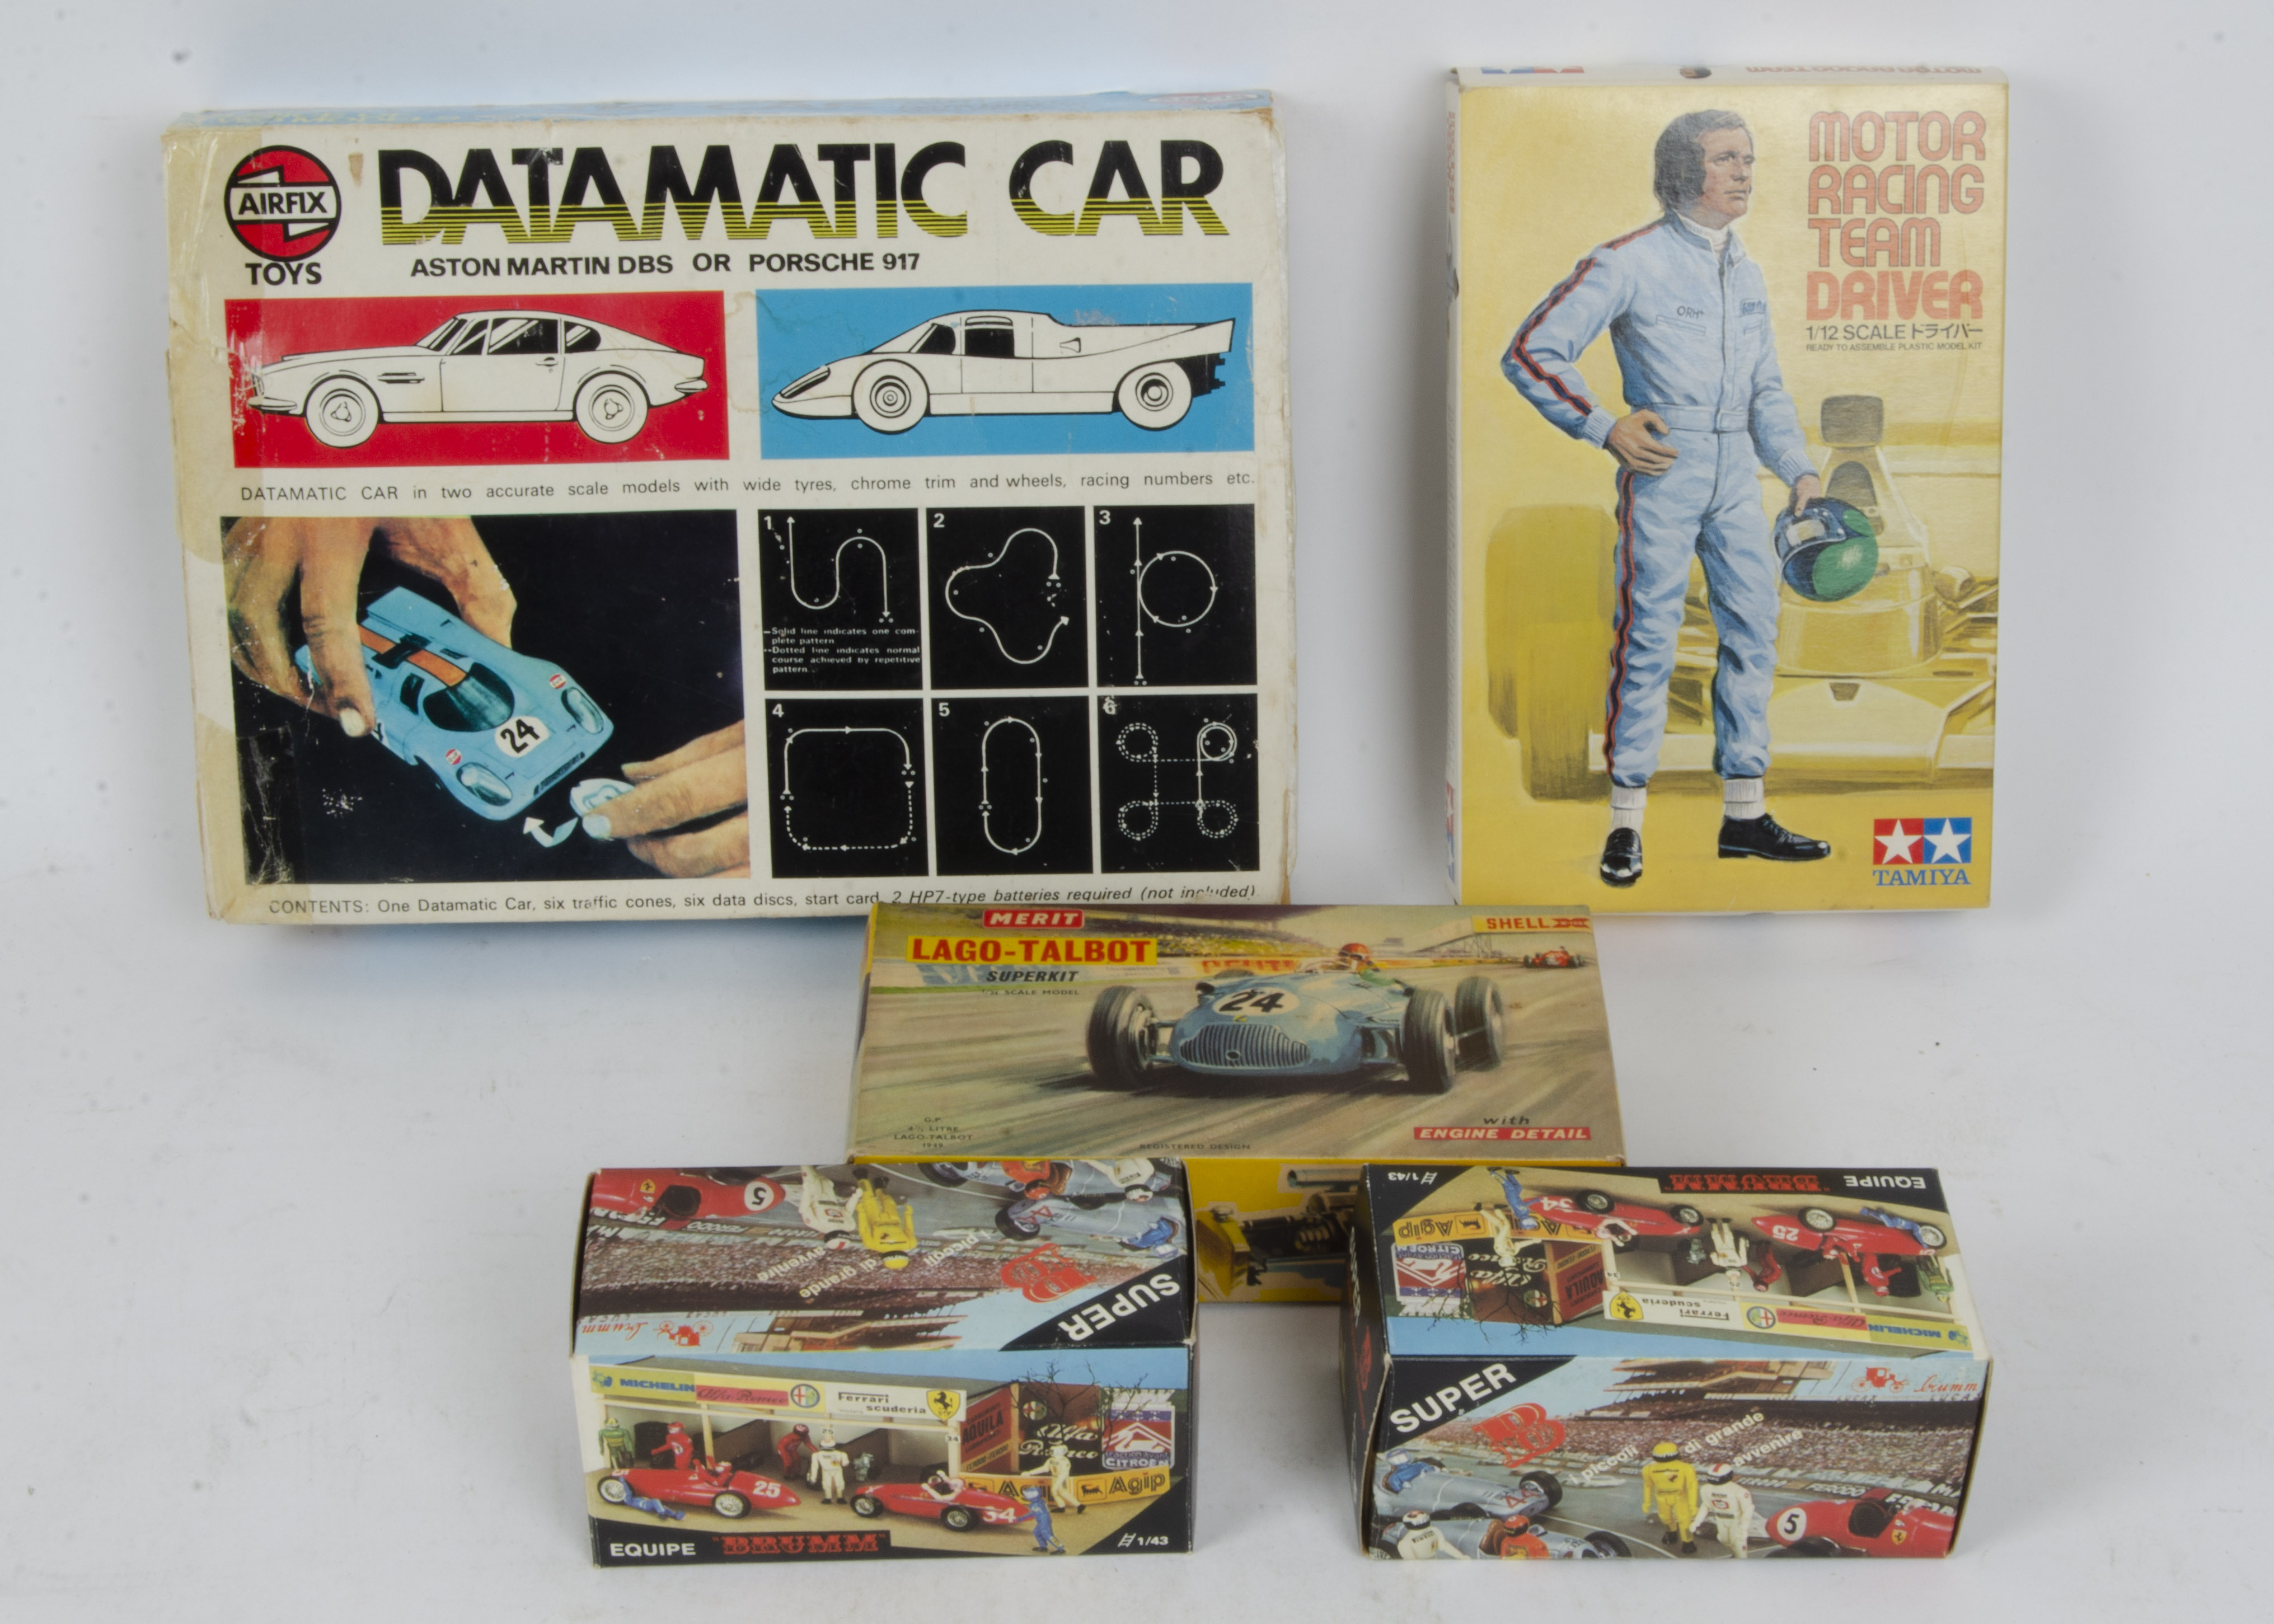 Competition Kits and Airfix Datamatic Slot Car, a boxed Merit 4624 1:24 scale 1949 Lago-Talbot (